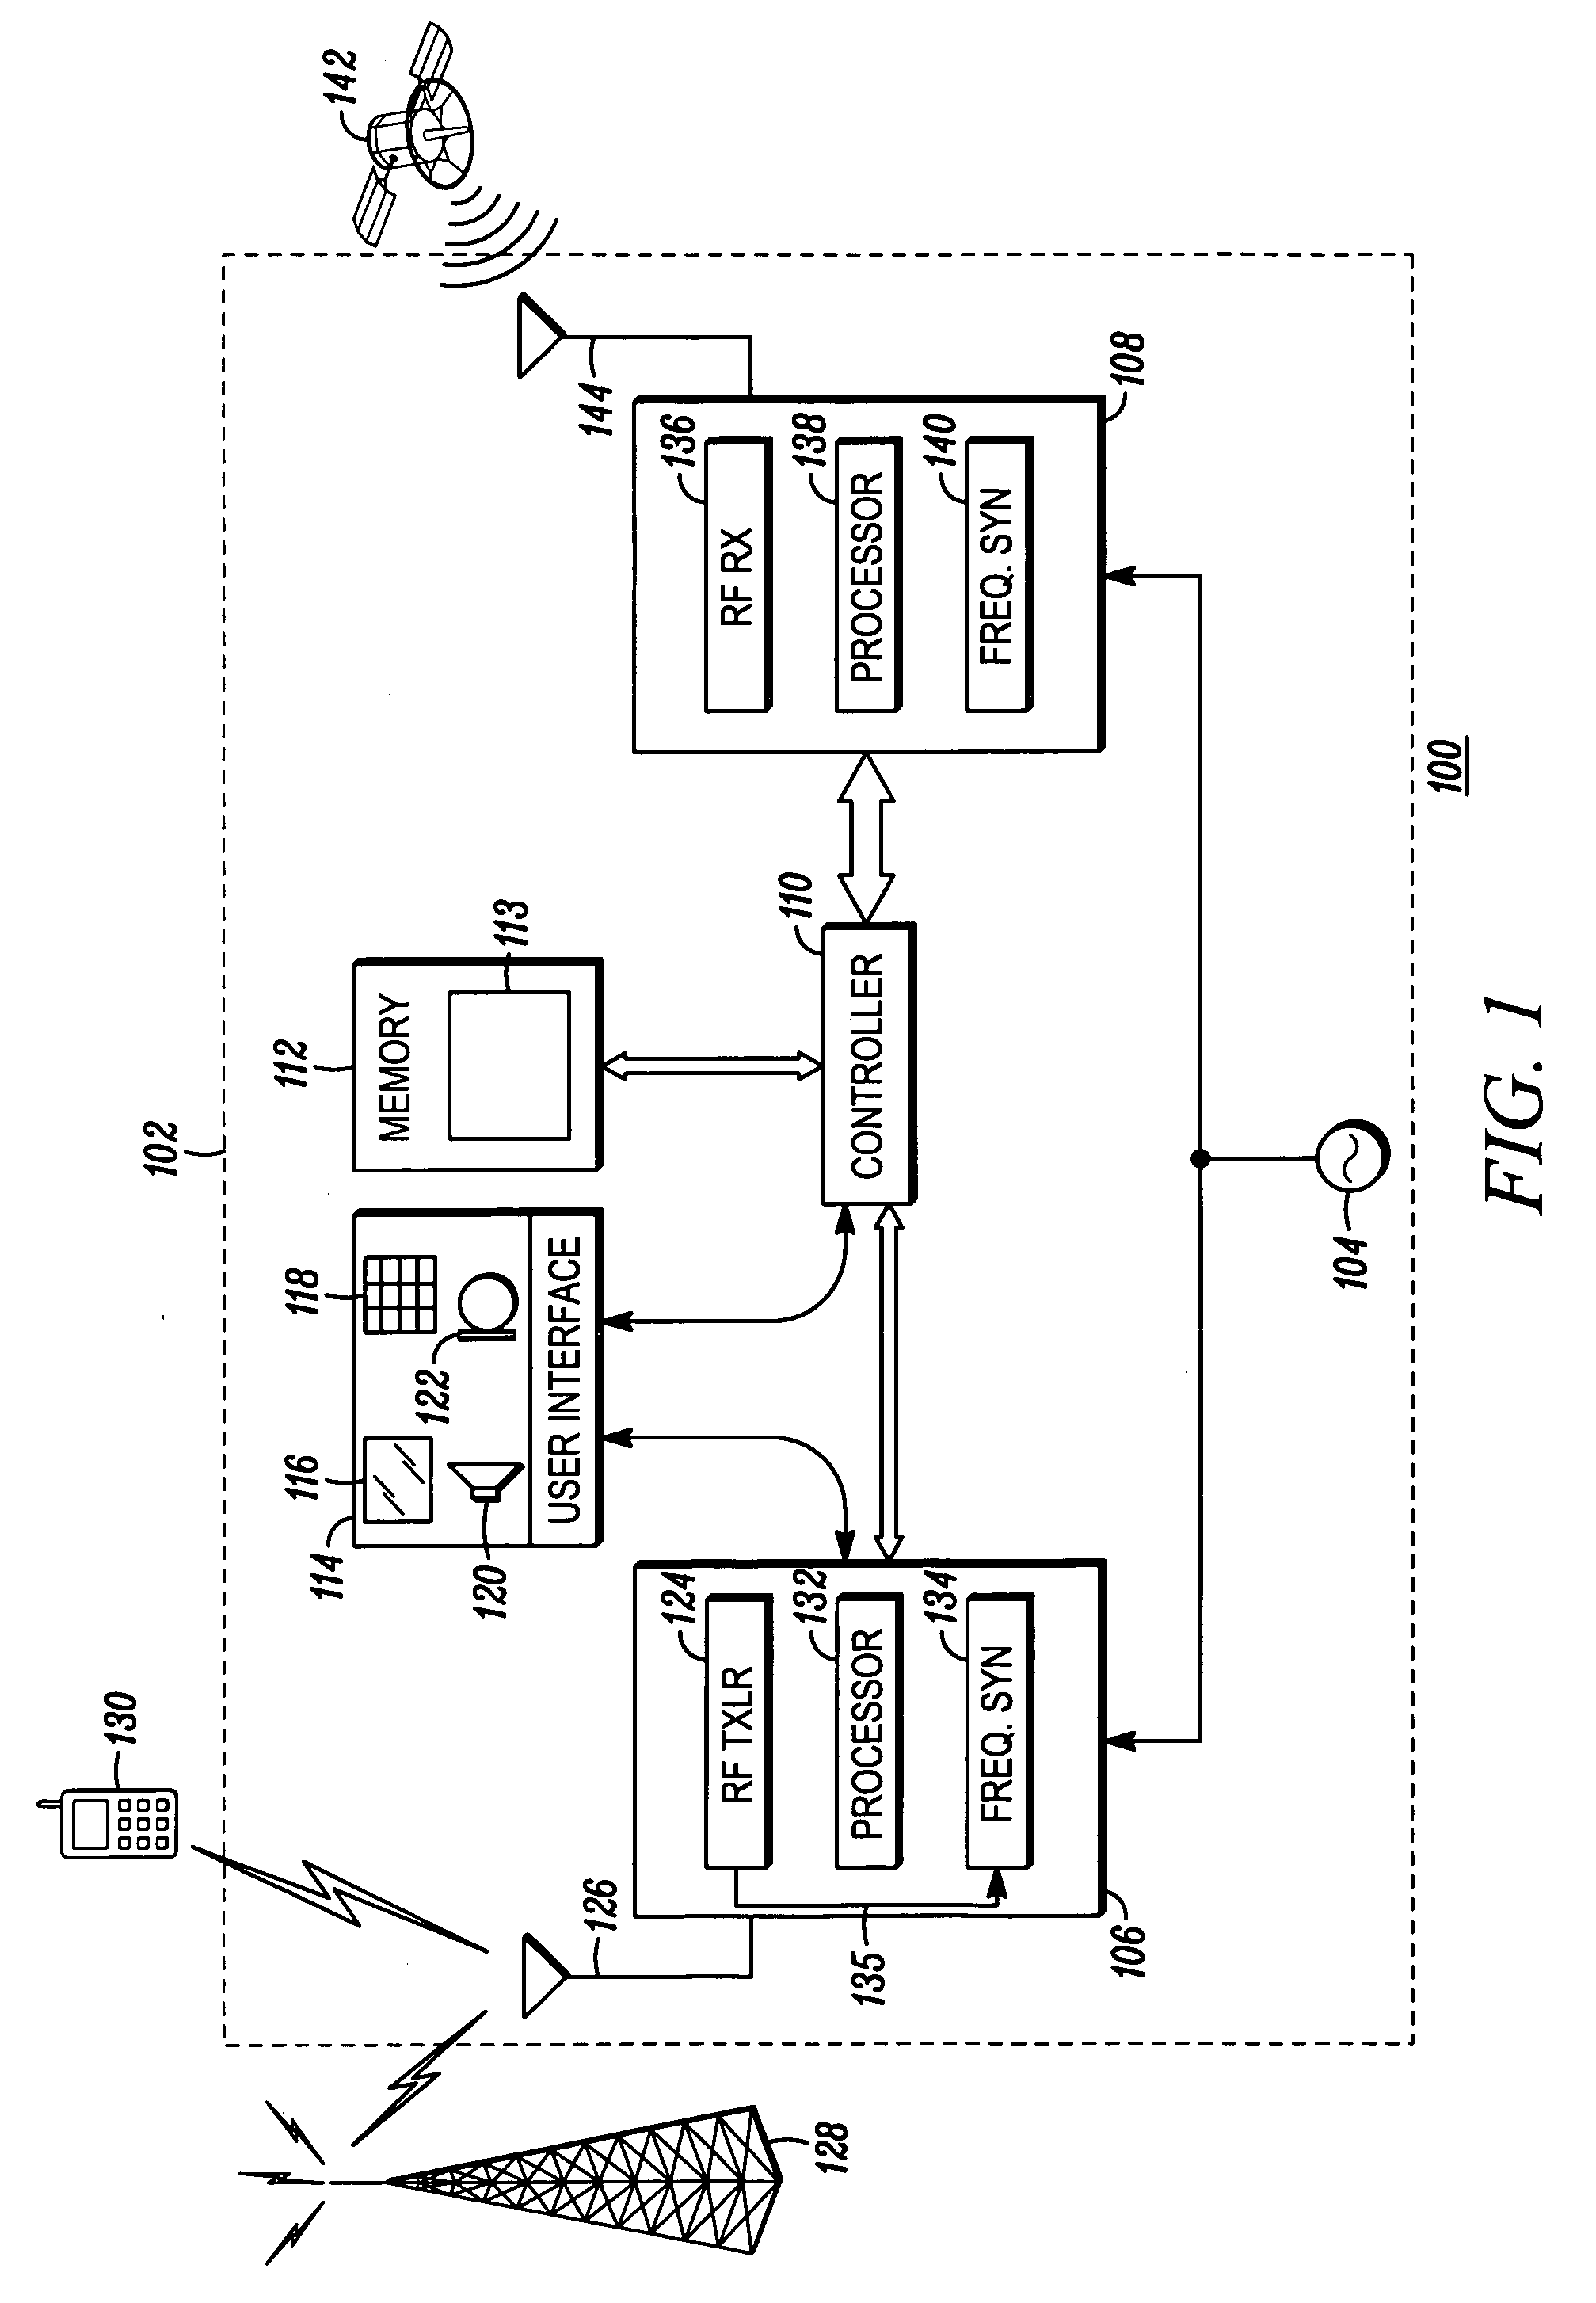 Method for providing location aiding among peers operating in a direct communication mode